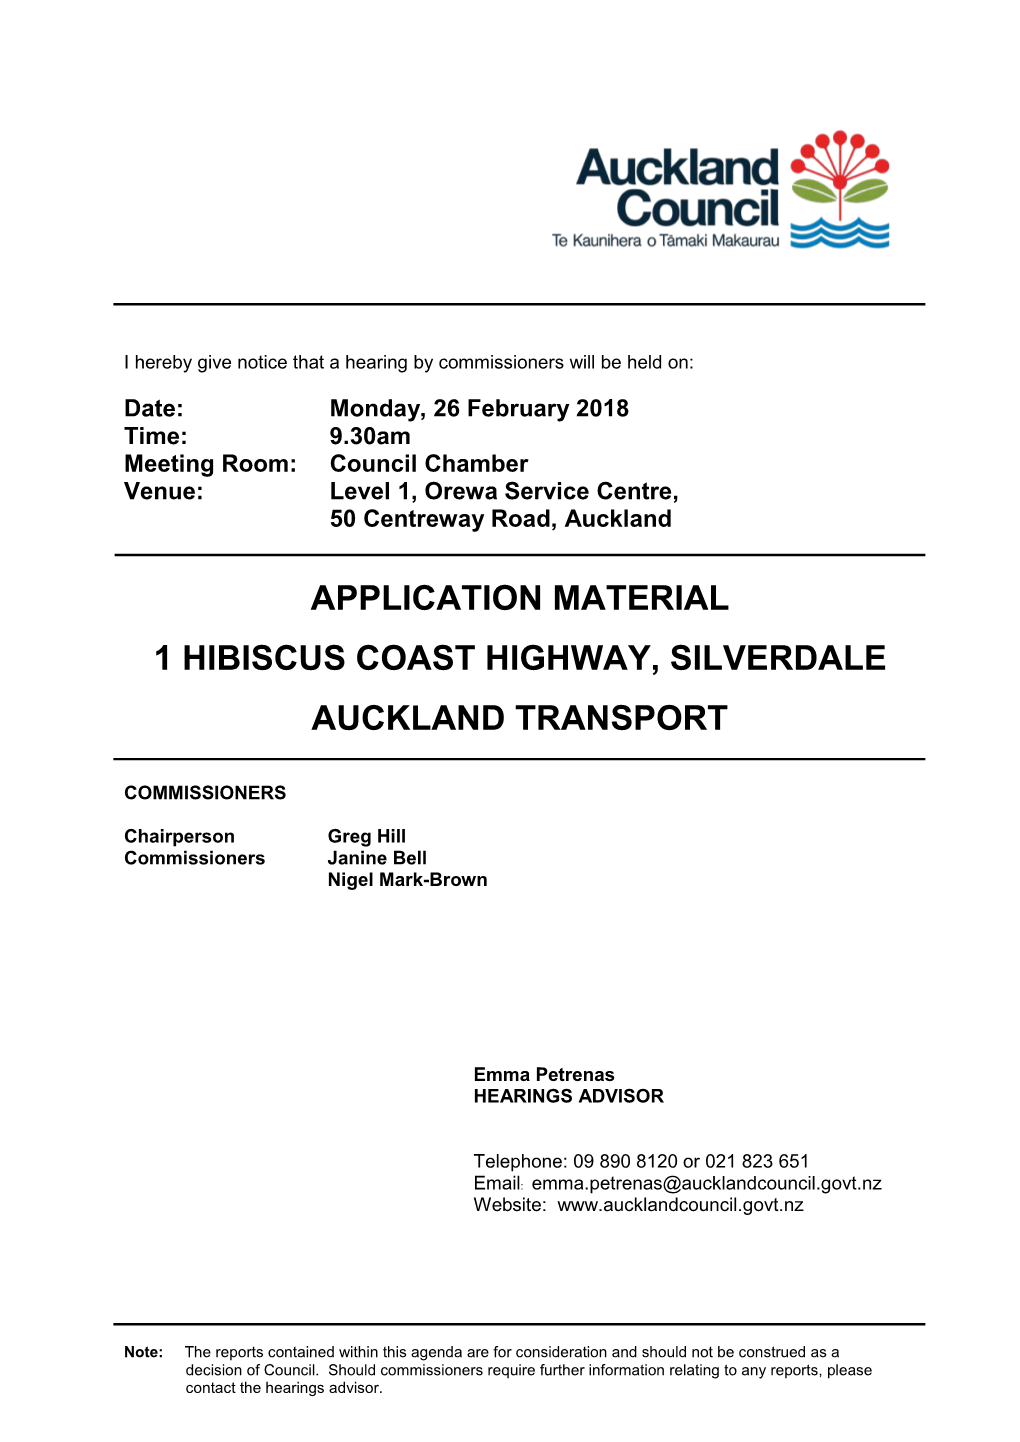 Application Material 1 Hibiscus Coast Highway, Silverdale Auckland Transport